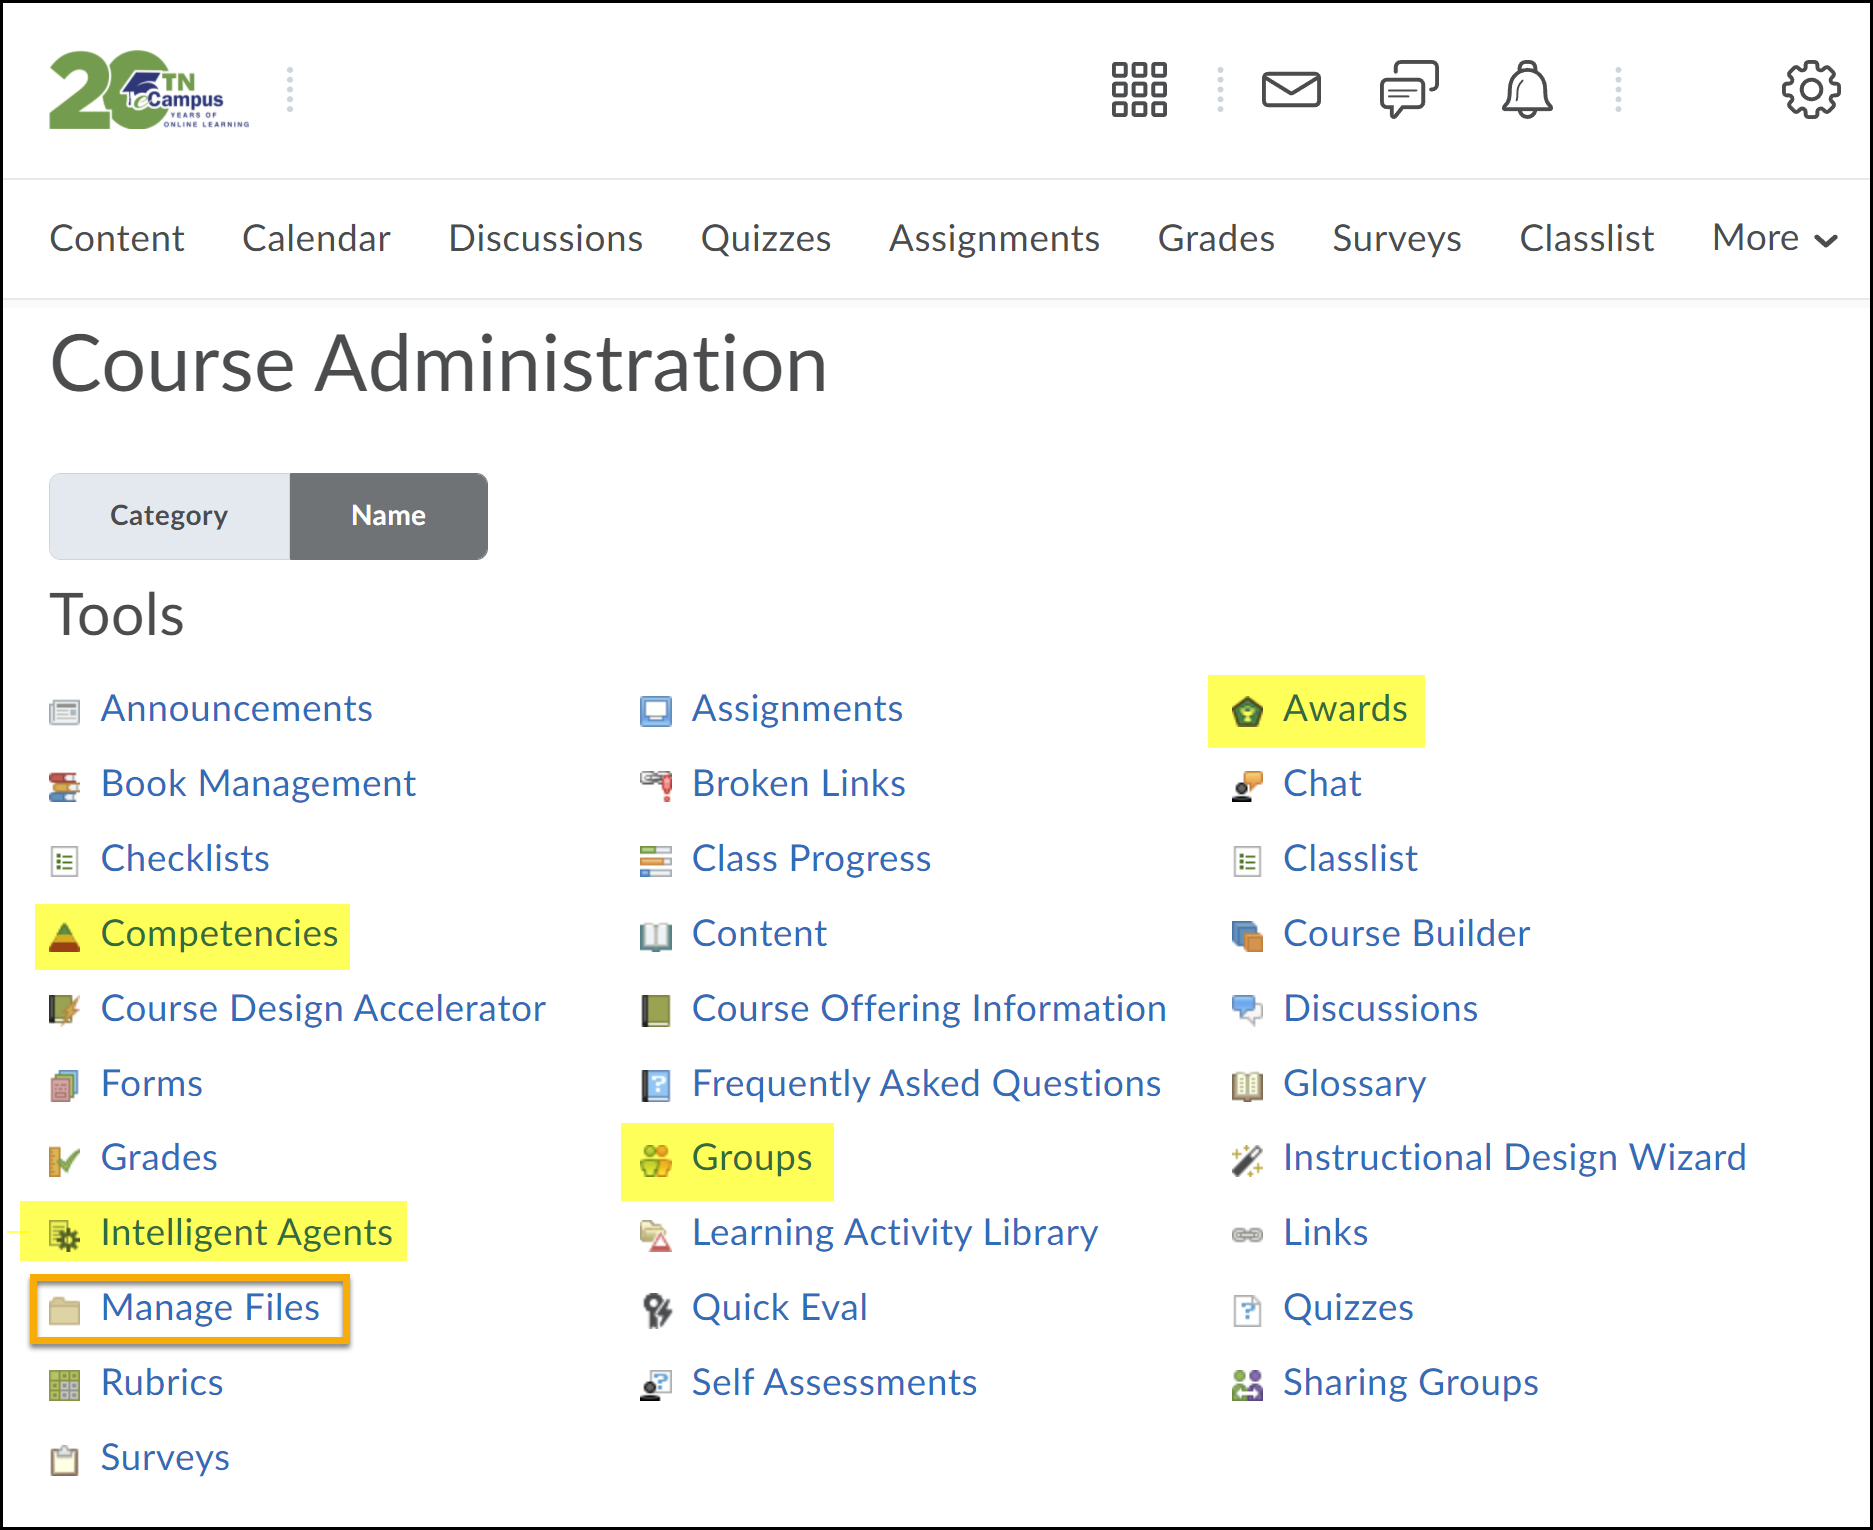 Managed Files, Competencies, Groups, Awards, Intellegent Agents are highlighted.